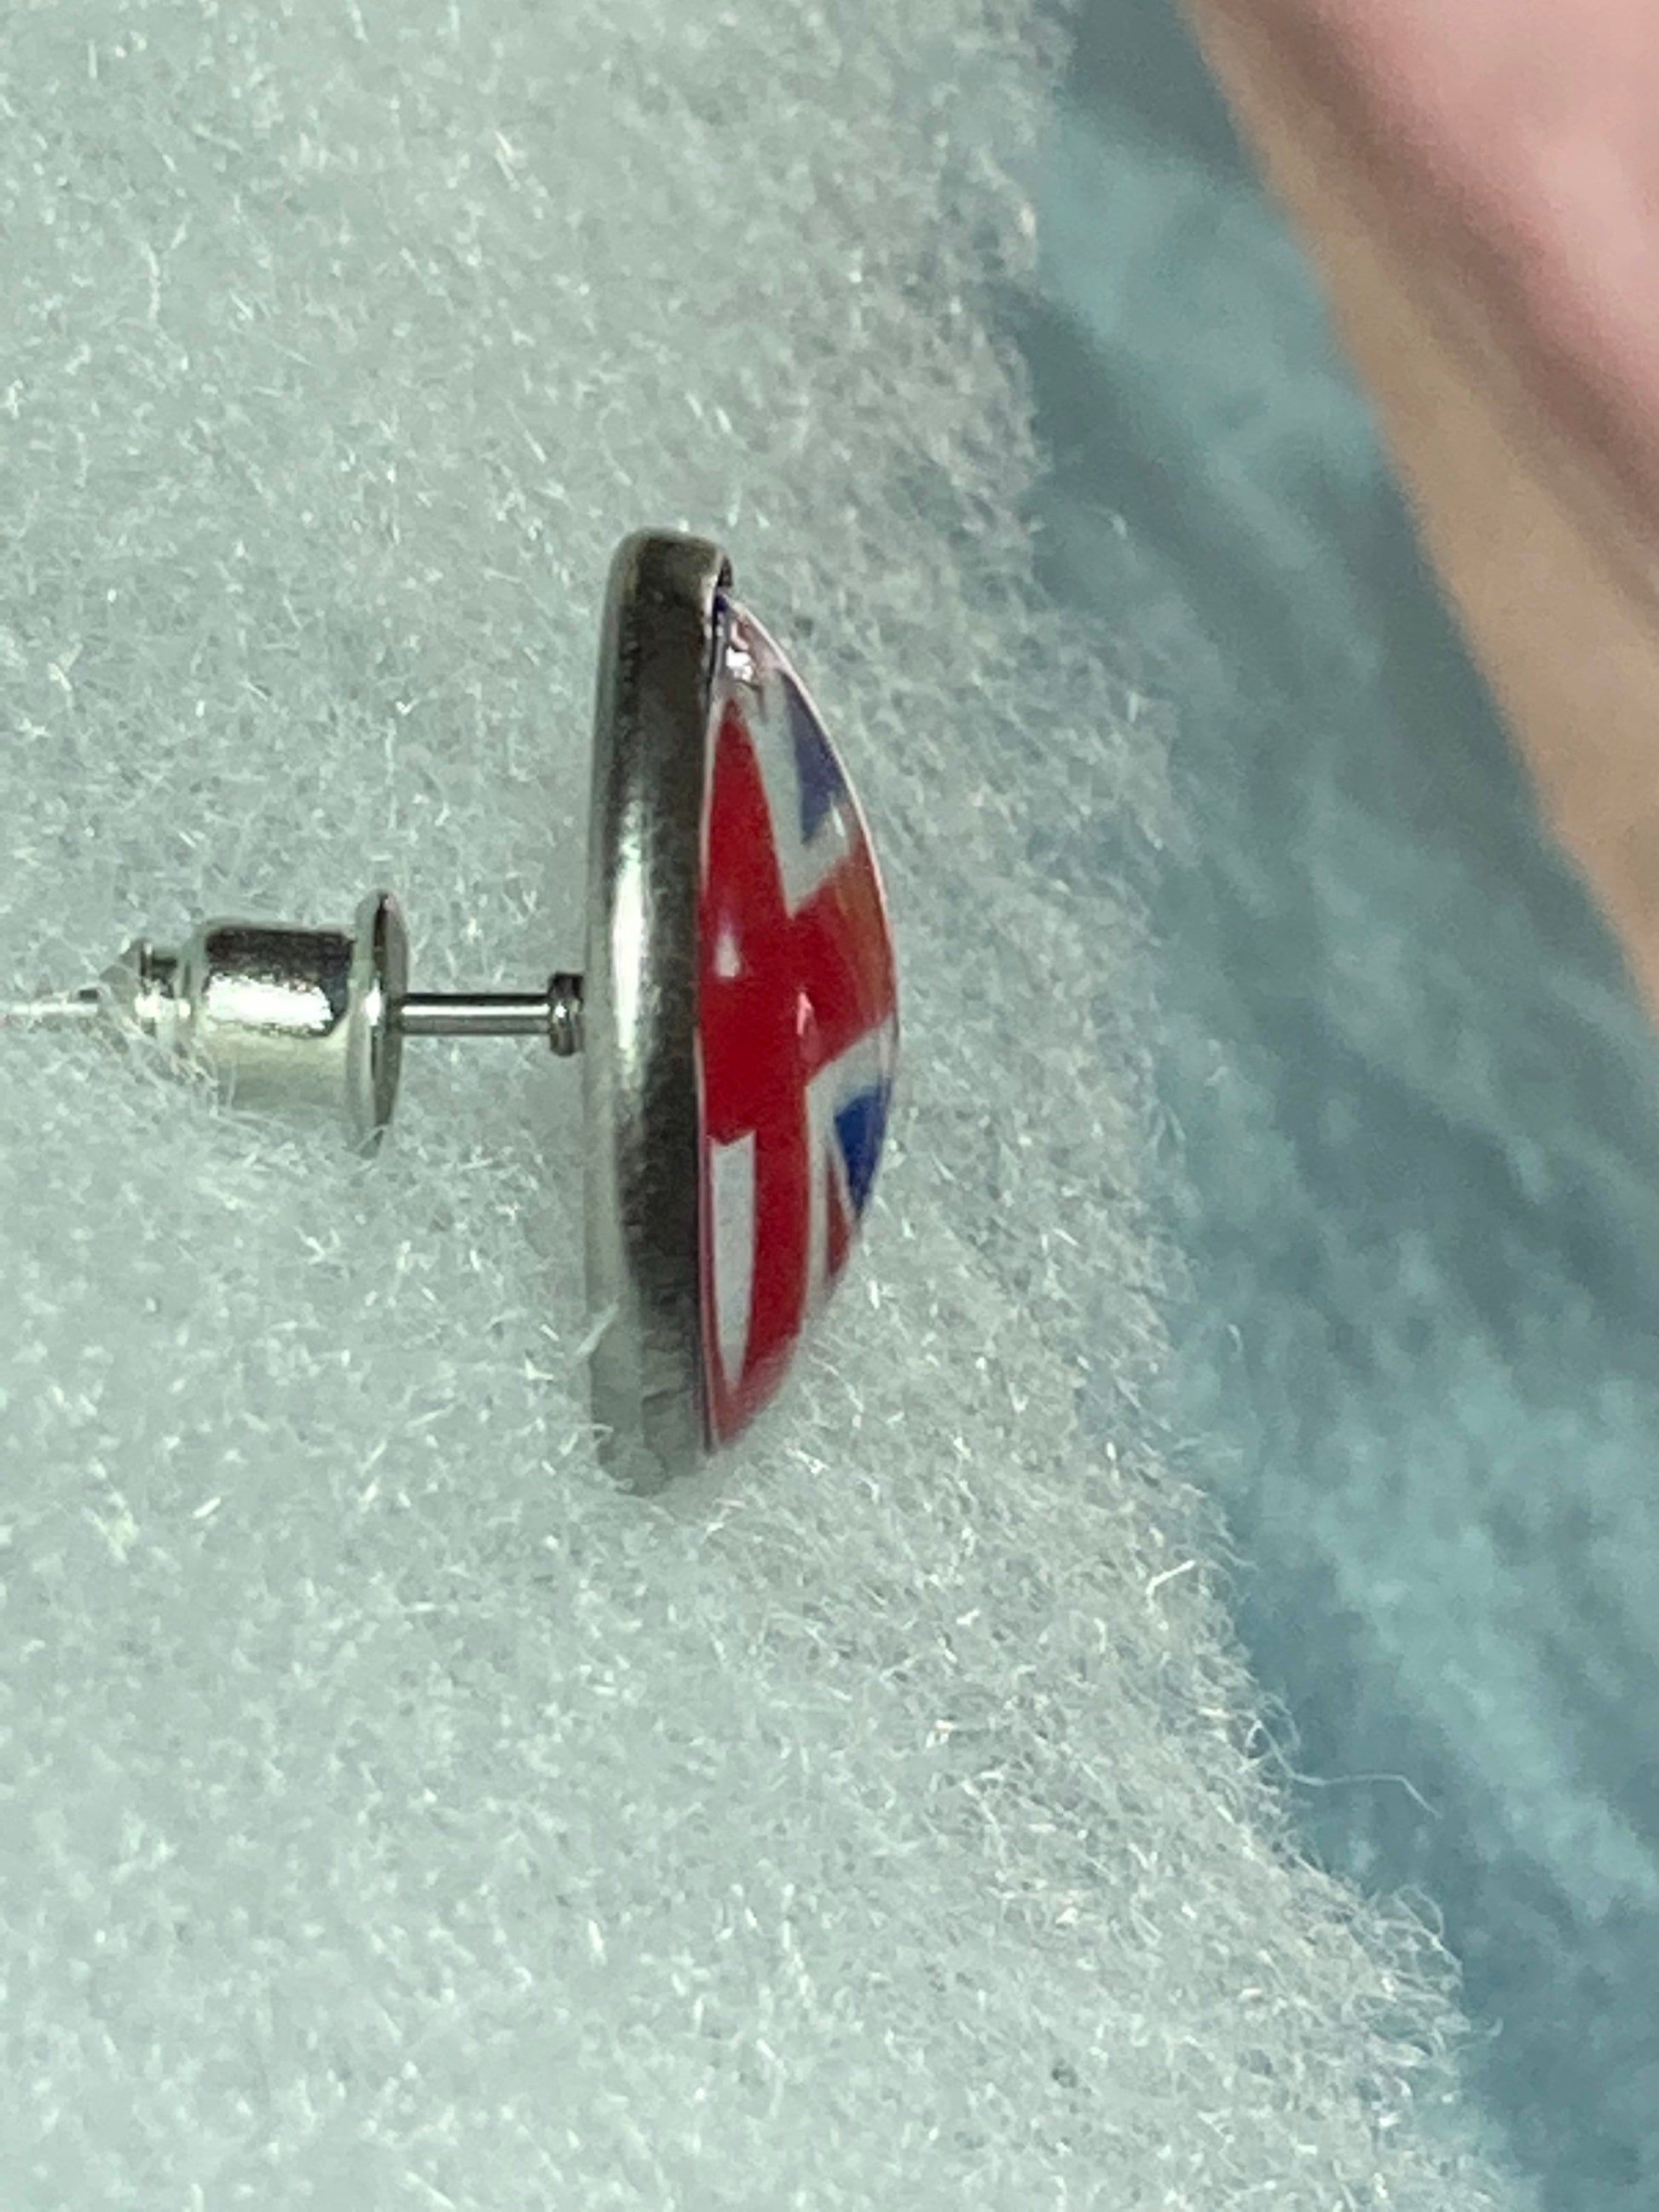 Uk Union Jack flag royal pierced round silver stud earrings with 16mm glass cabochons